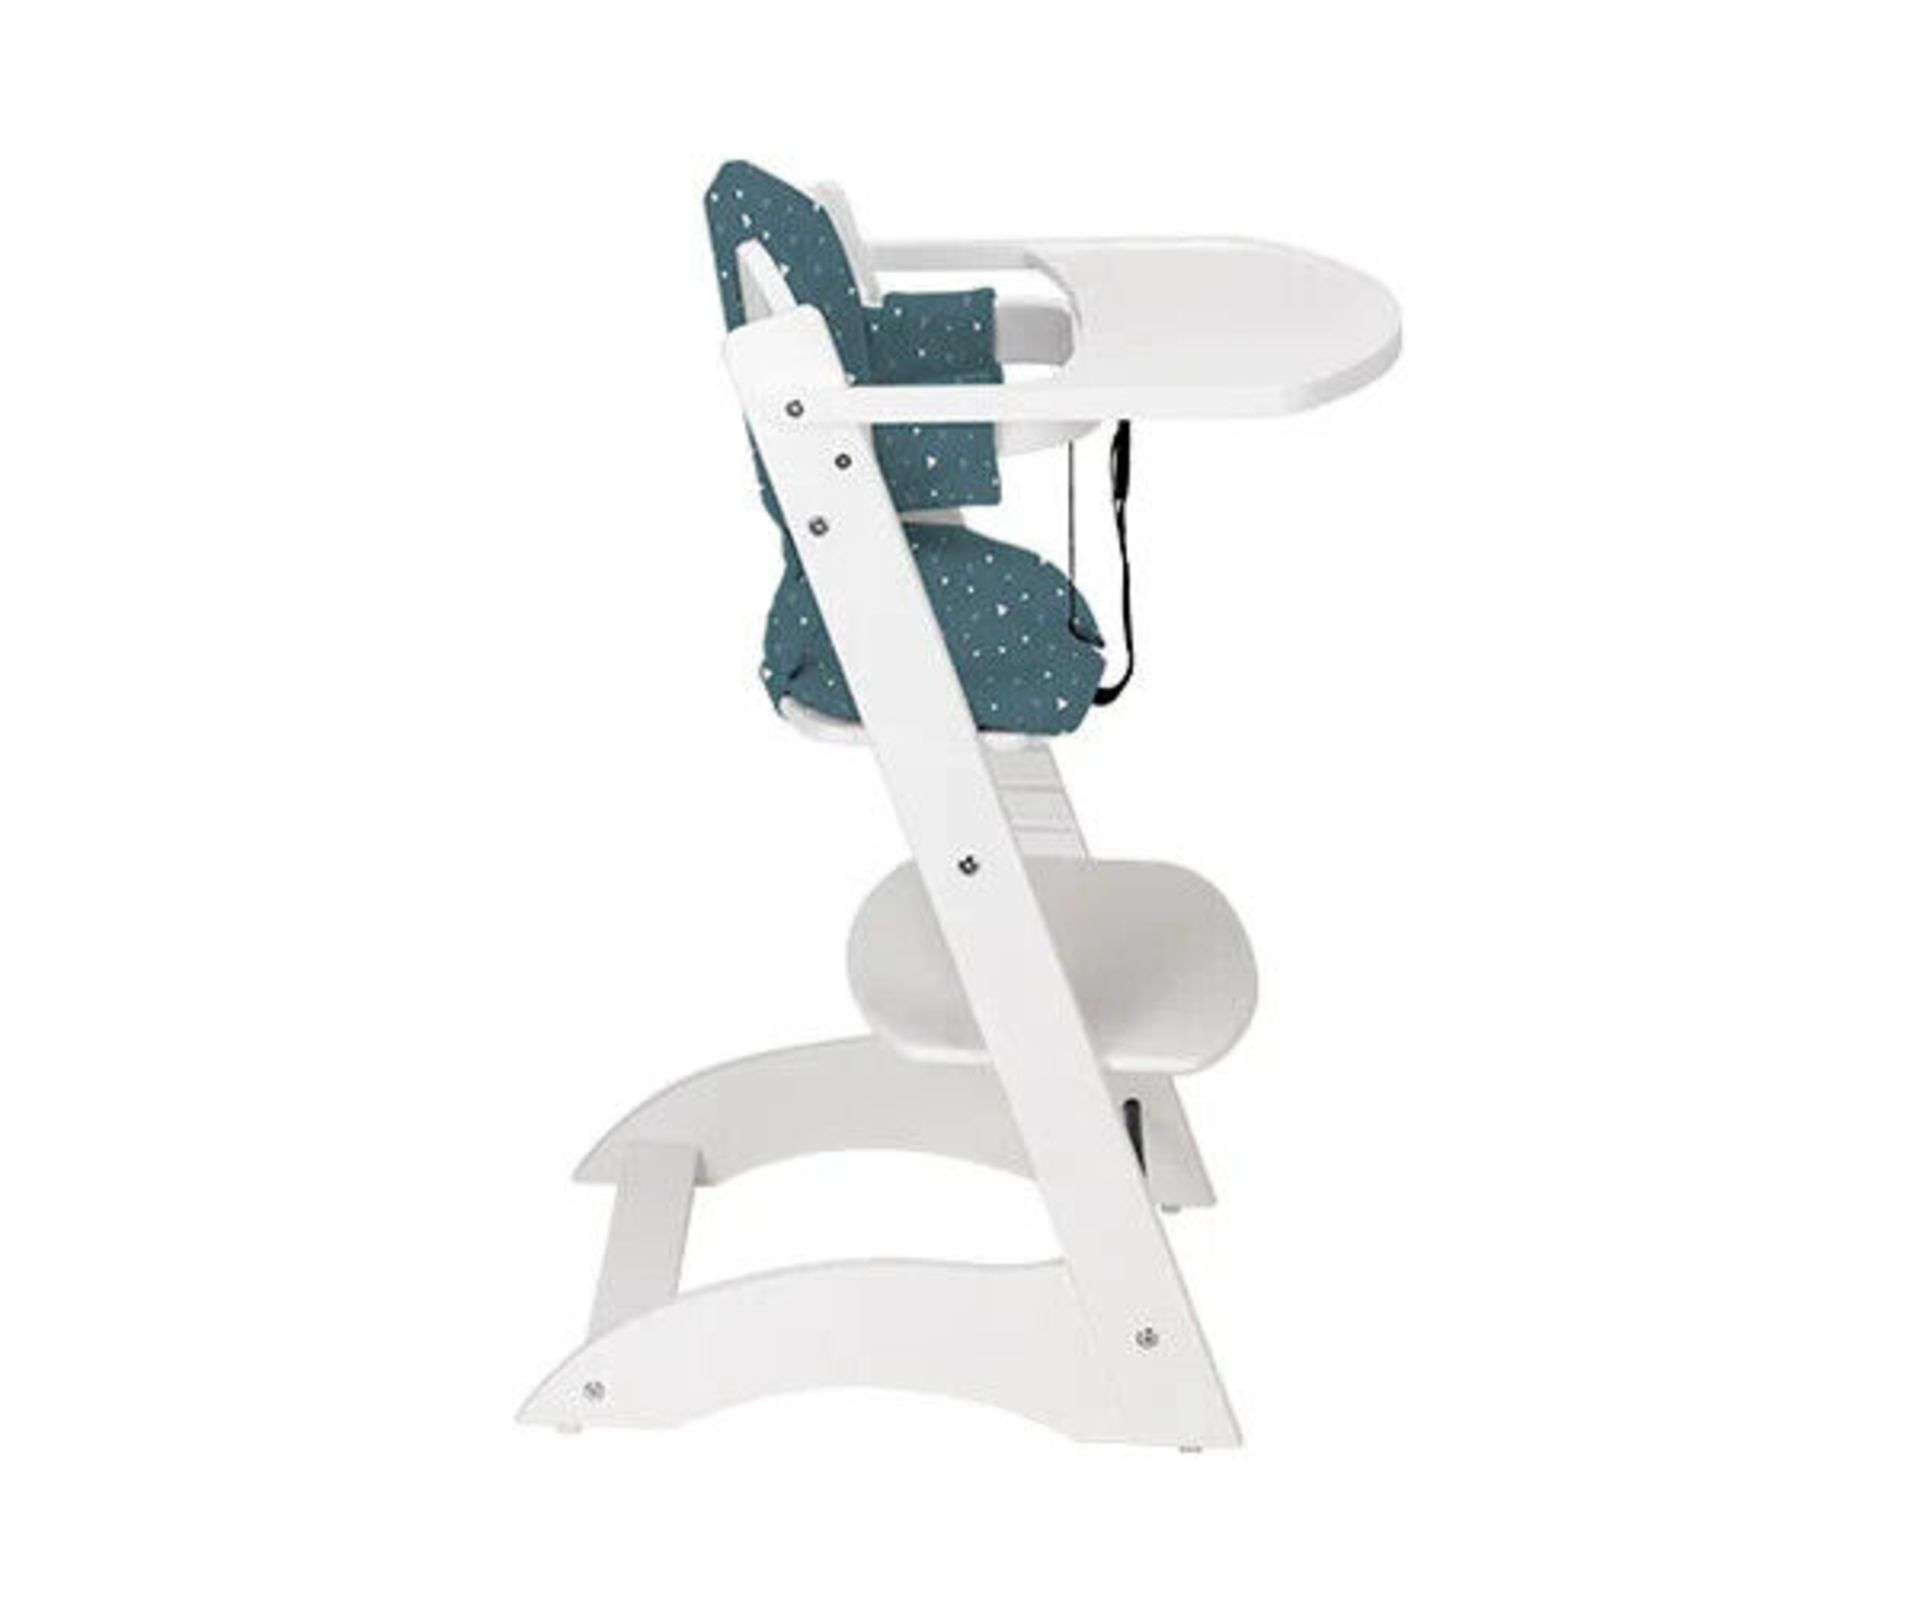 Mokee Yummee 5-Point Harness High Chair, White - Image 2 of 4